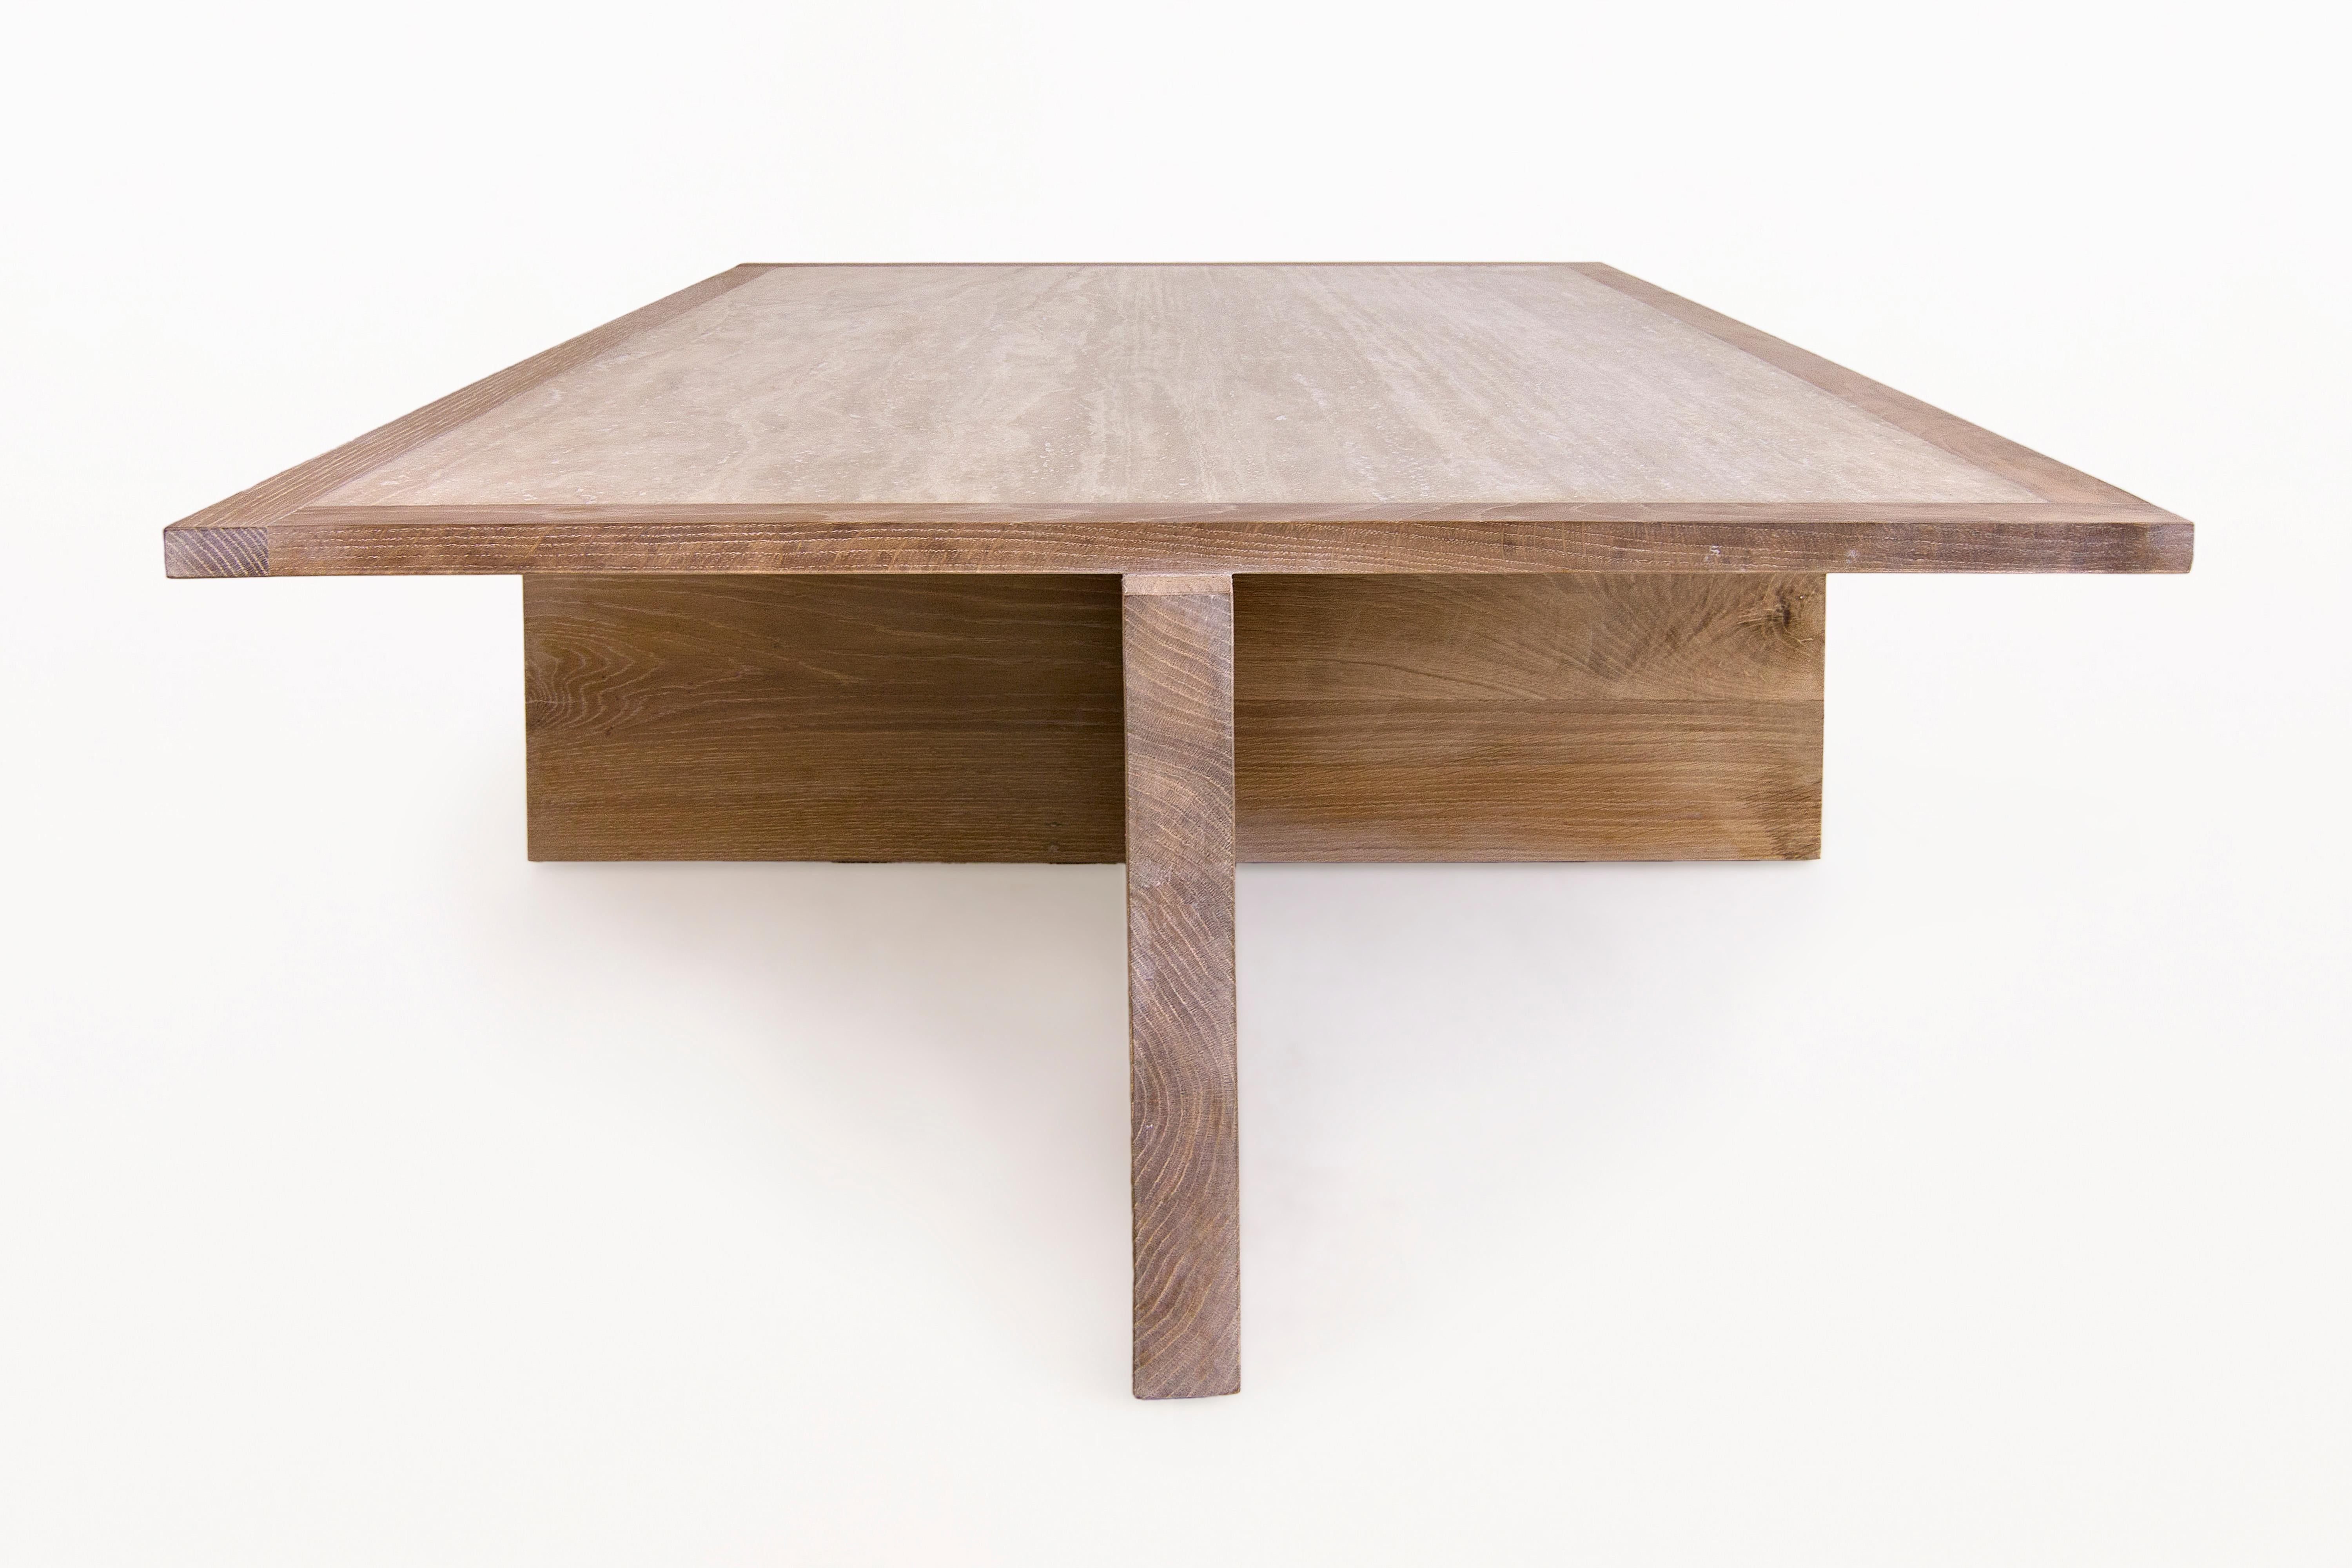 Serge Castella coffee table,
travertine tabletop and oak base.
2019, France
Excellent condition.
While studying fashion in Paris, Serge Castella spent his time wandering around flea markets and the Louvre. Becoming an antique dealer then became